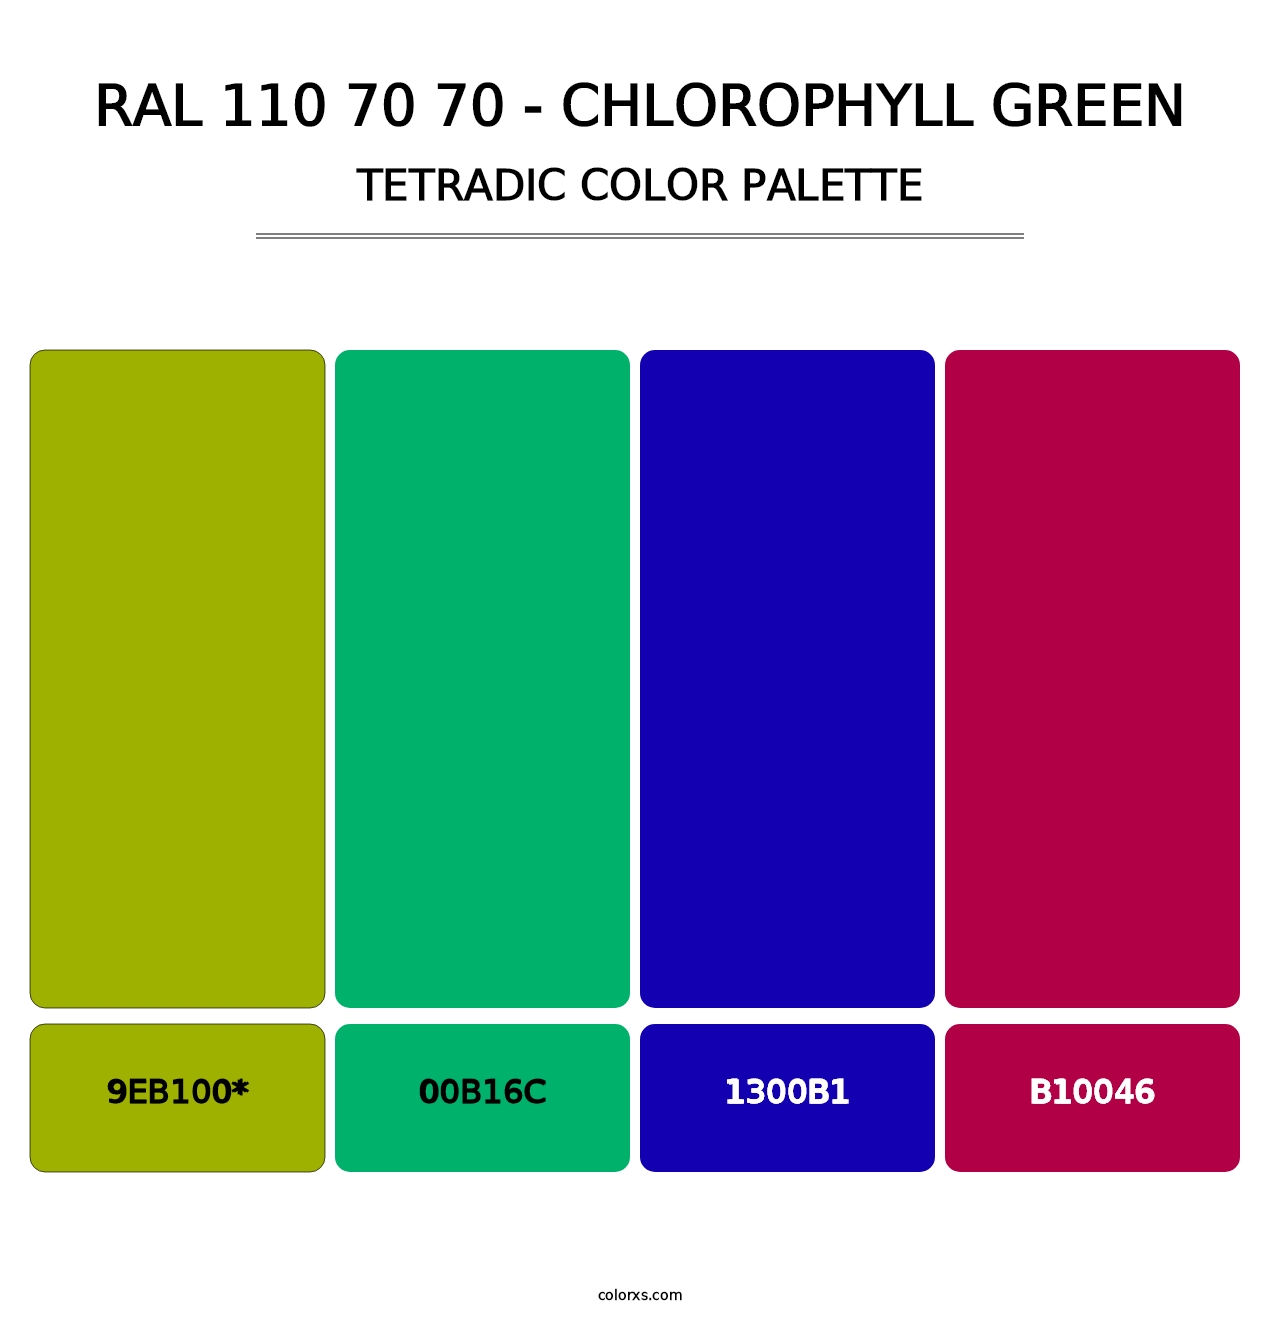 RAL 110 70 70 - Chlorophyll Green - Tetradic Color Palette